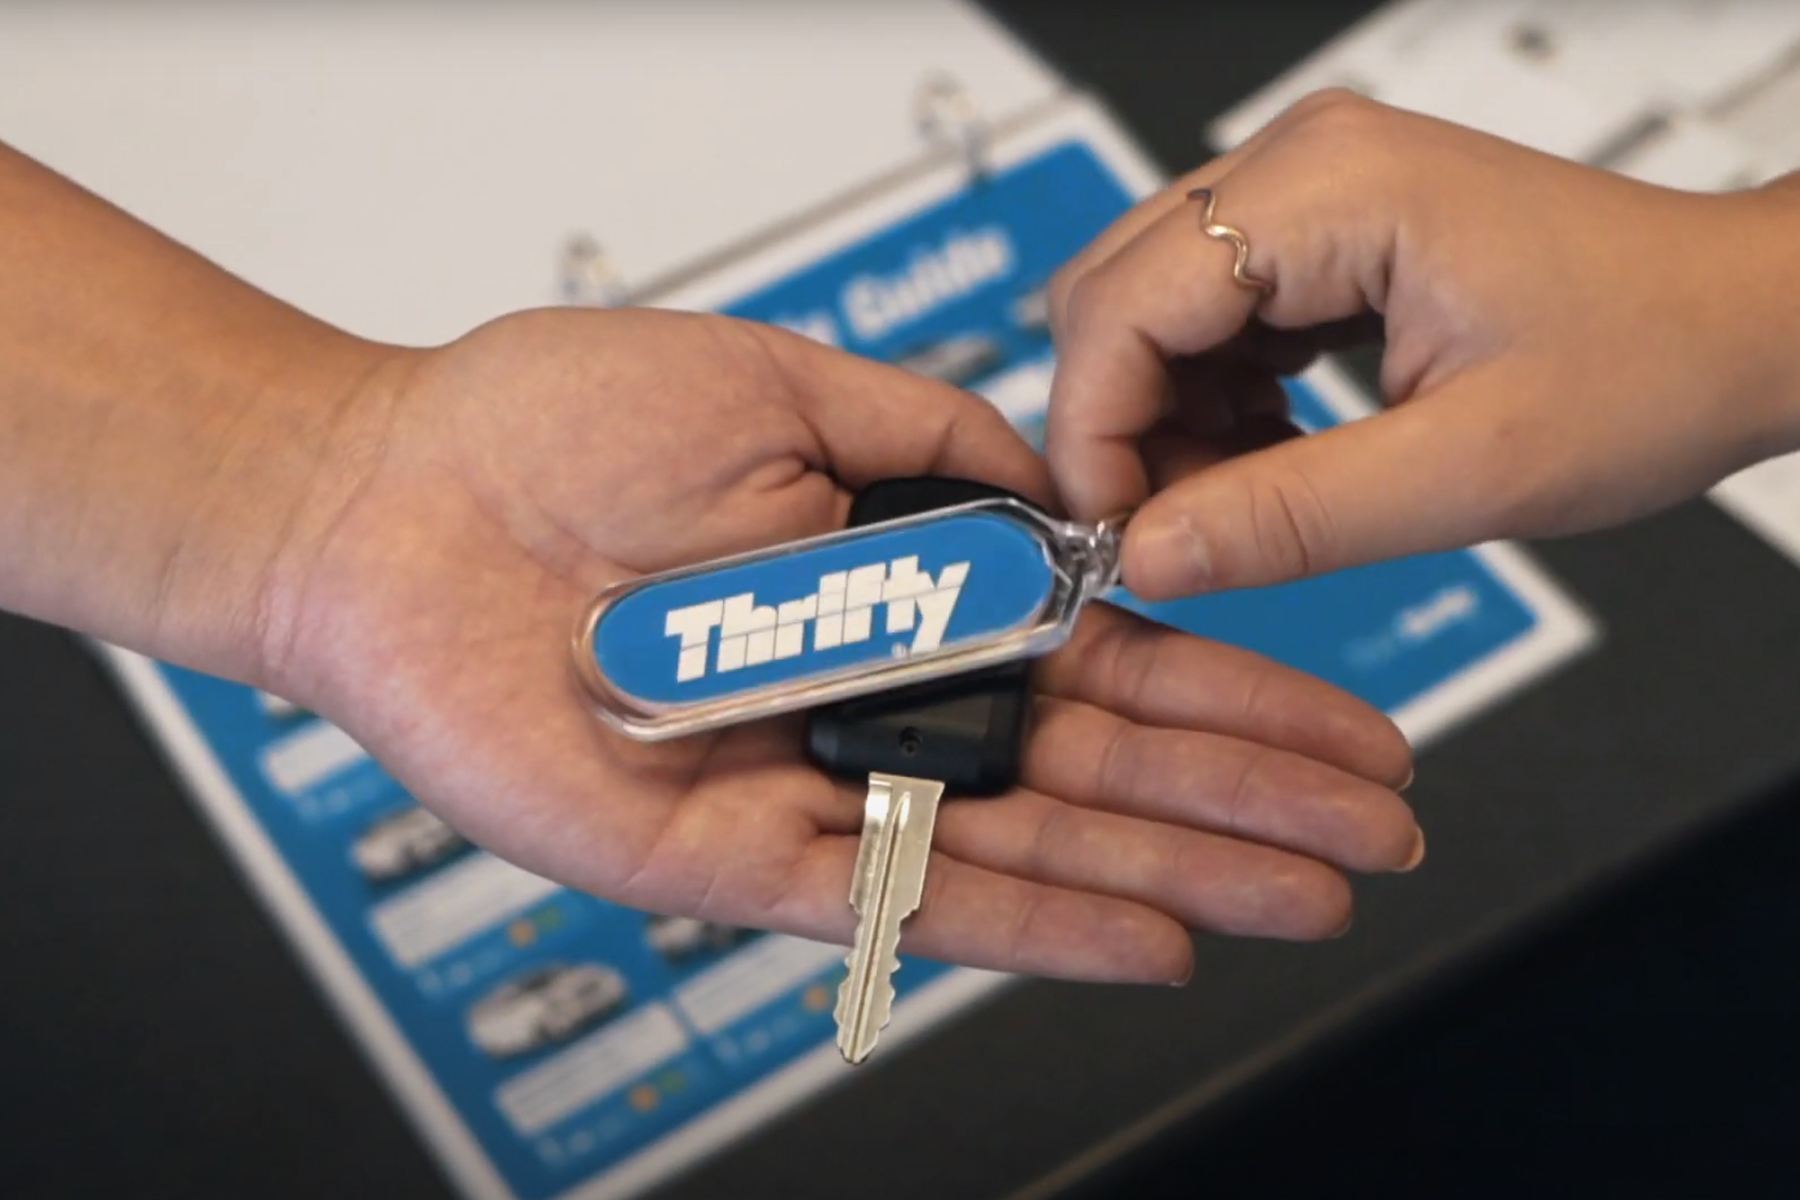 Thrifty free vehicles to healthcare workers COVID-19